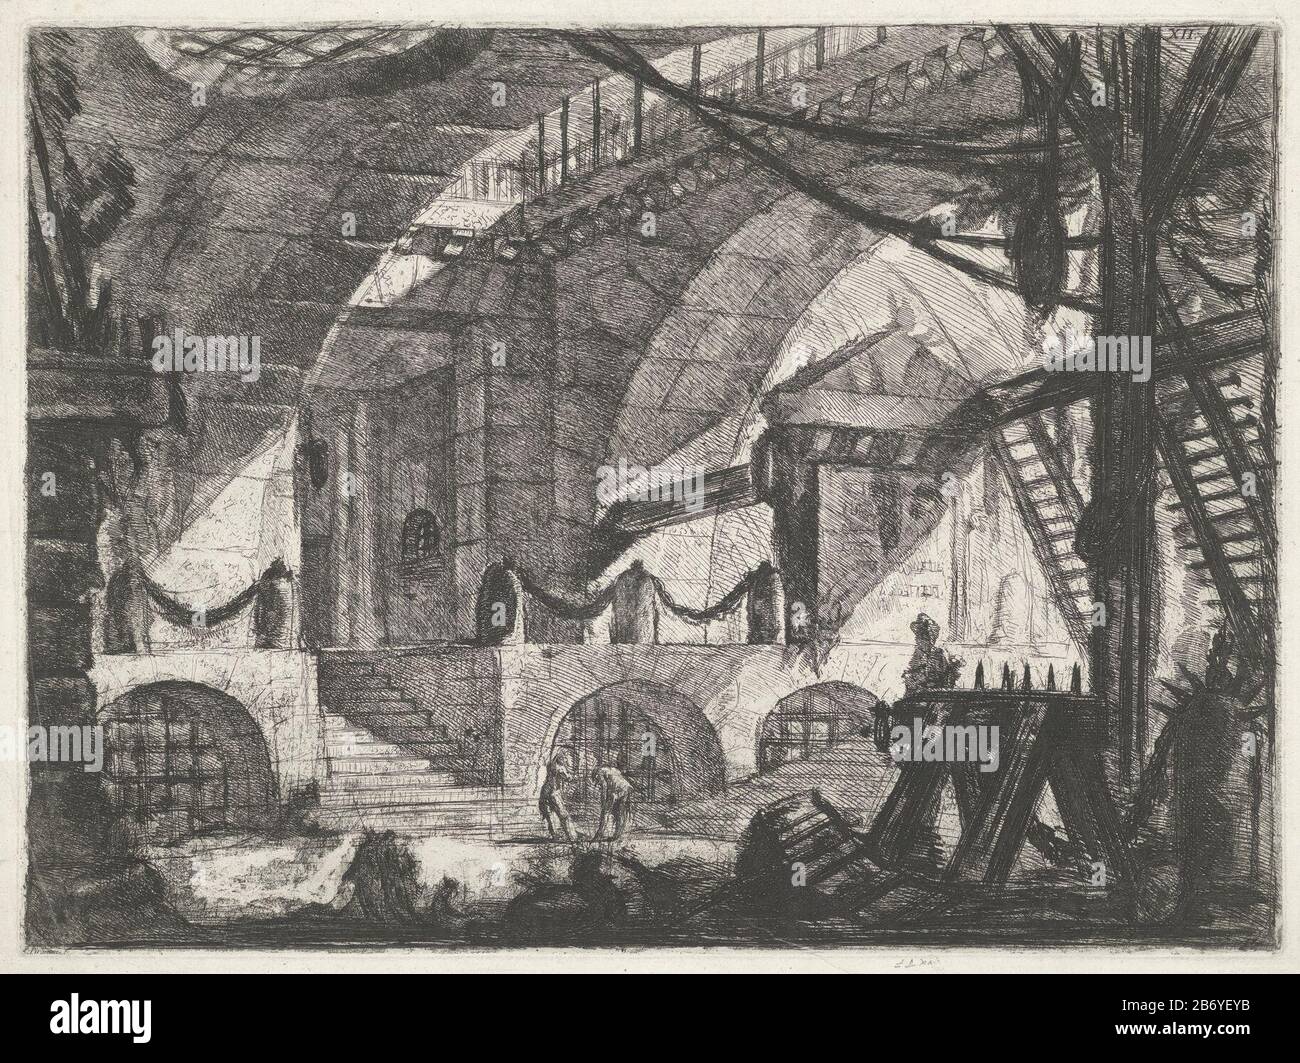 Kerker met zaagbok Kerkers (serietitel) Carceri d'invenzione (serietitel) Face in a monumental building ( possibly a dungeon) with a sawing trestle in the foreground on the right. Numbered right: XII. Manufacturer : print maker: Giovanni Battista Piranesi (indicated on object), at its design: Giovanni Battista Piranesiuitgever: Giovanni Battista PiranesiPlaats manufacture: Rome Date: 1761 Physical characteristics: etching and engra material: paper Technique: etching / engra (printing process) Measurements : plate edge: h 415 mm × W 561 mmToelichtingDeze picture is part of the second edition of Stock Photo